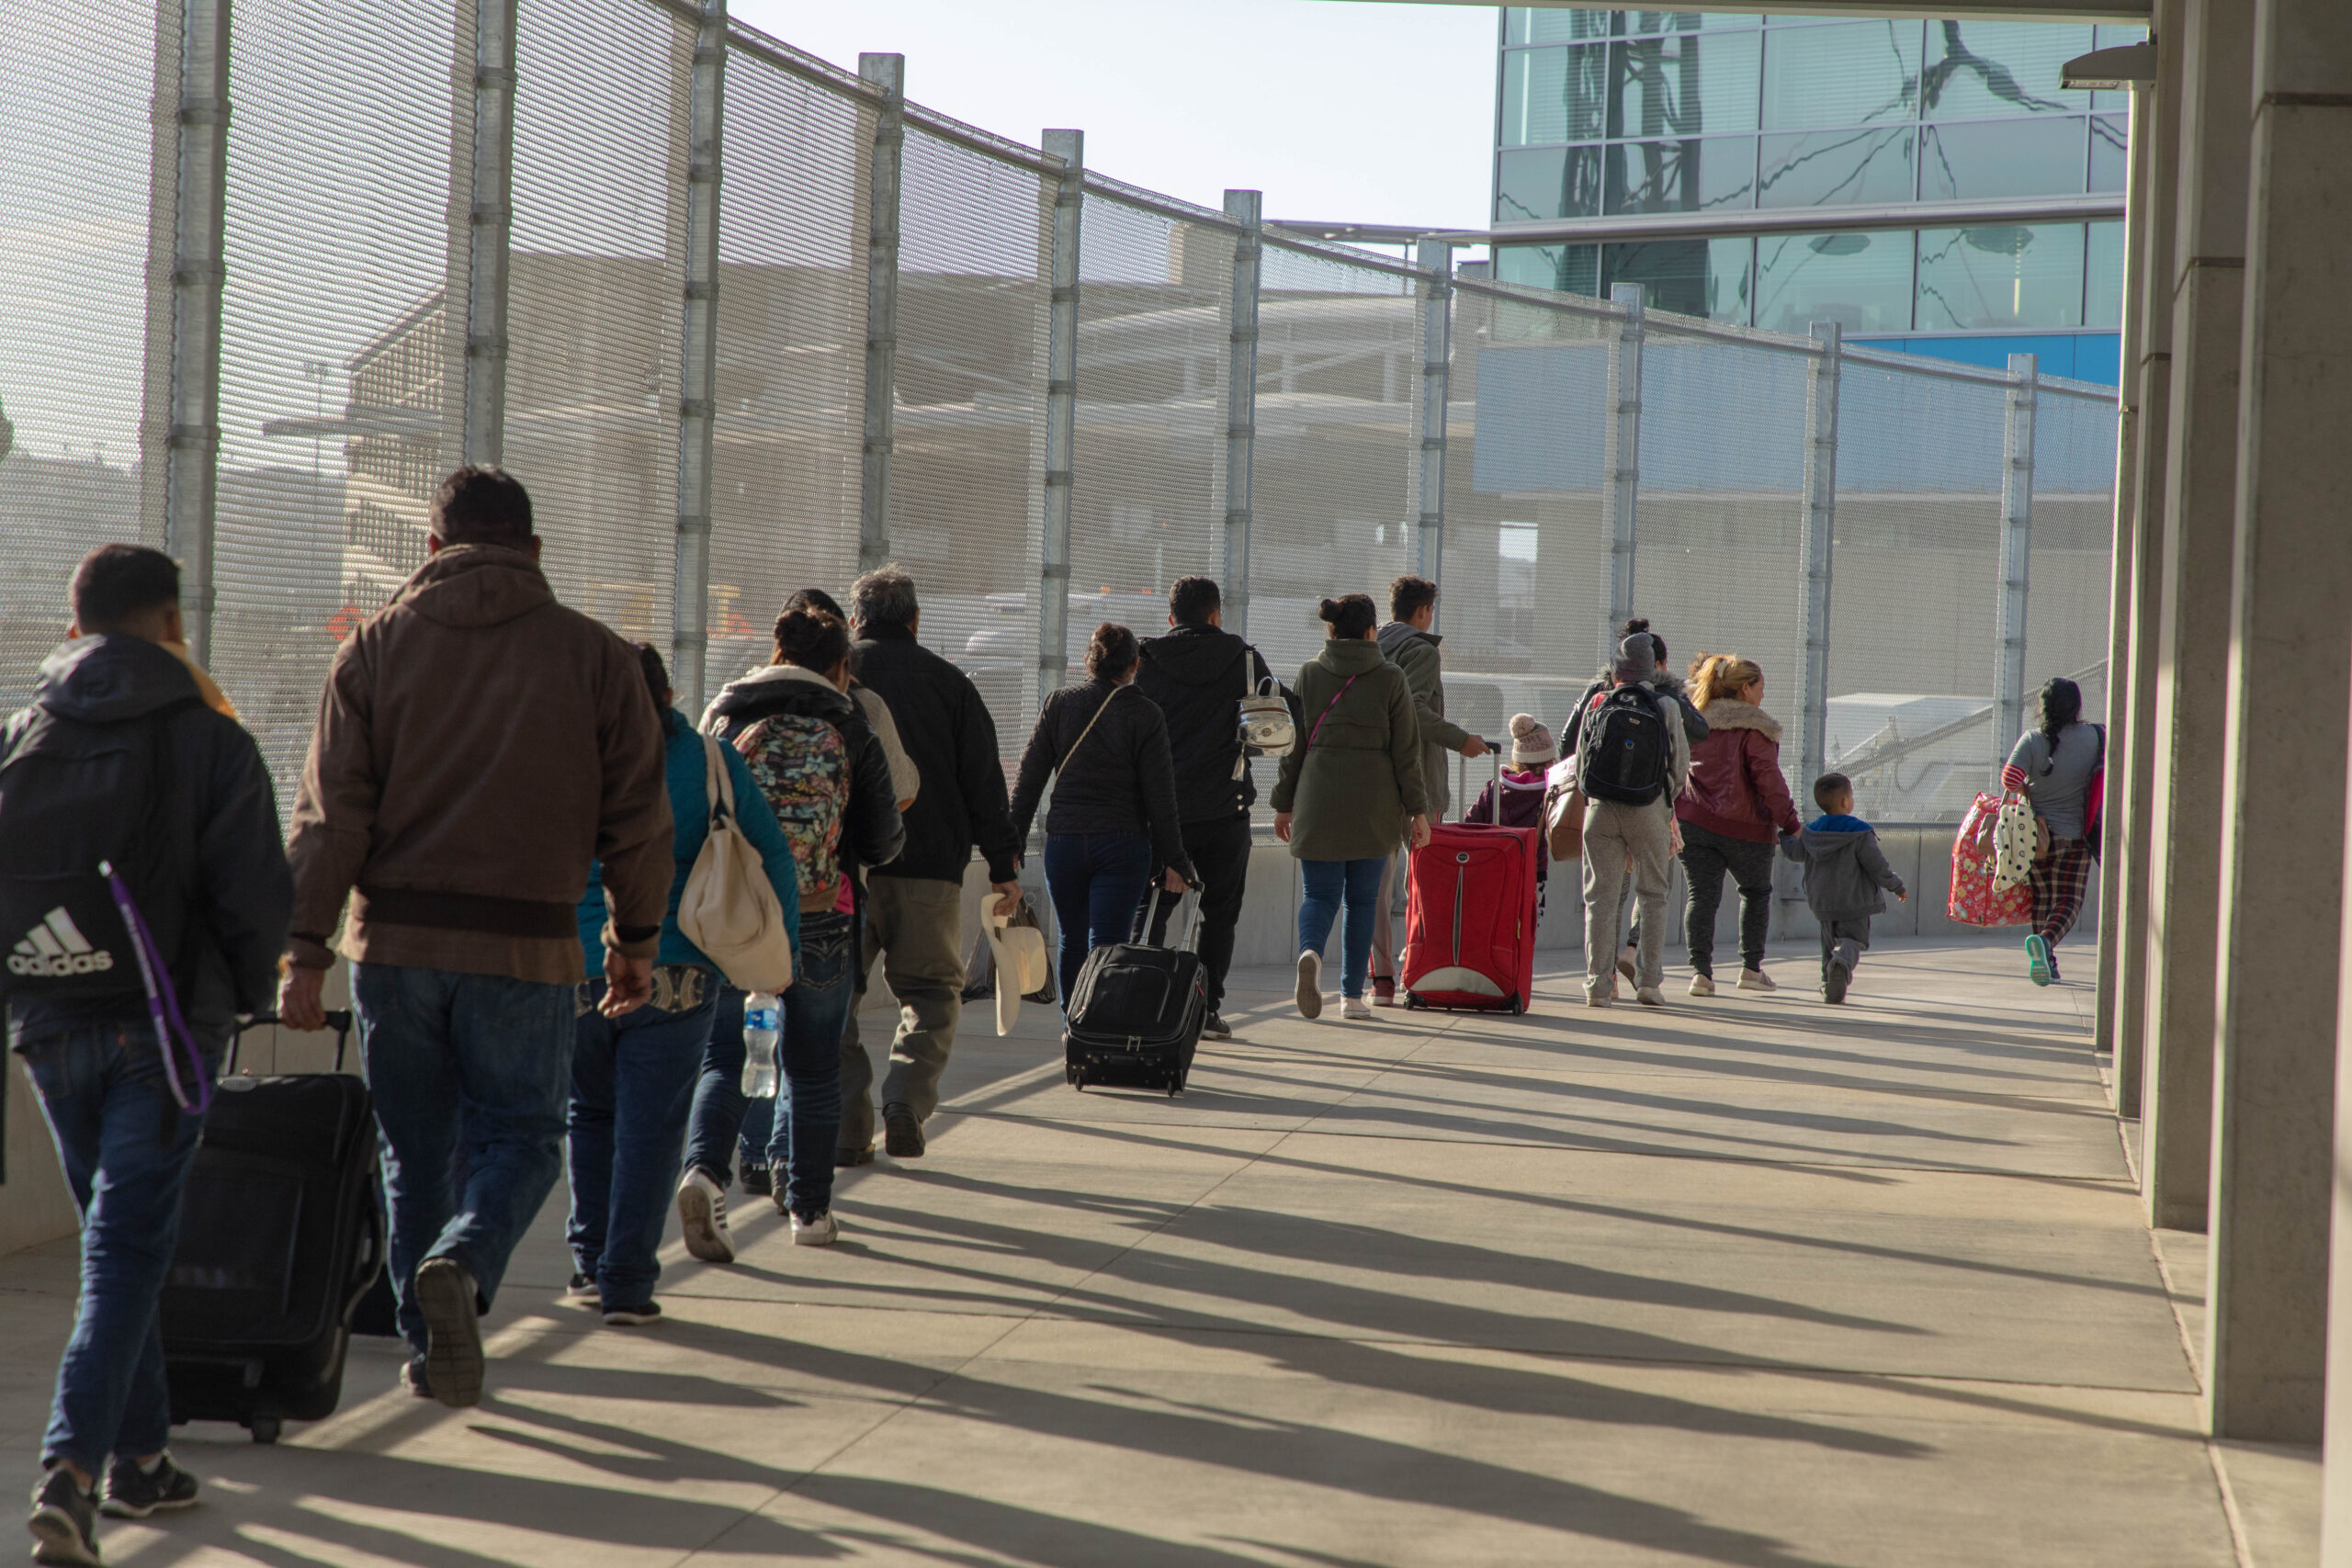 People walk in a line, some with suitcases, near a fence.